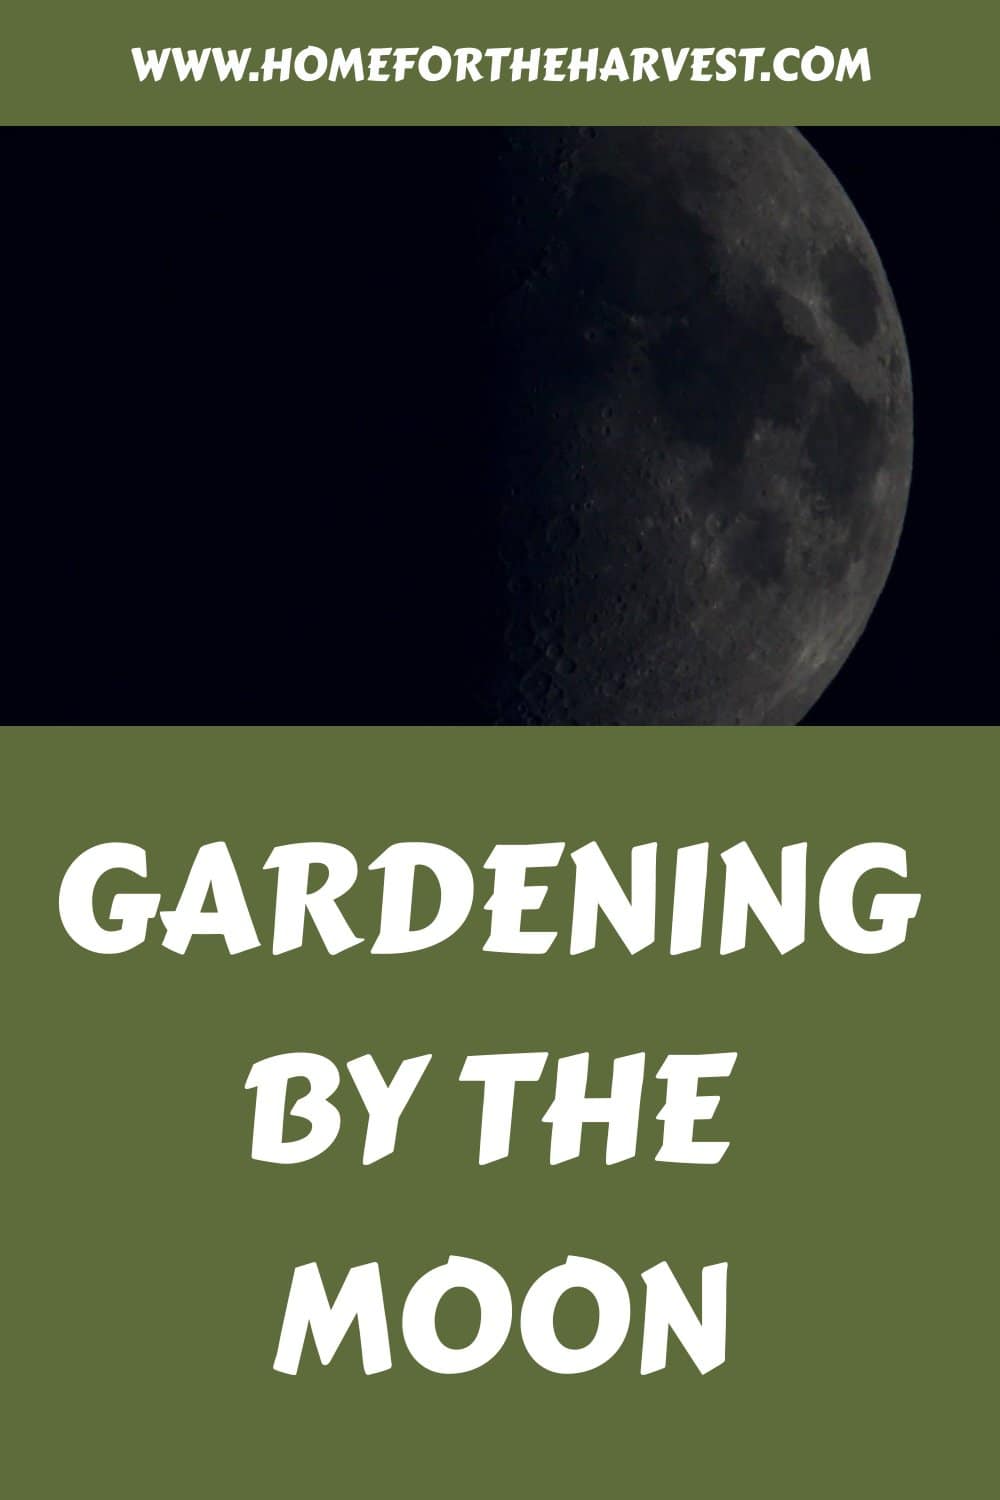 Gardening by the moon generated pin 2202